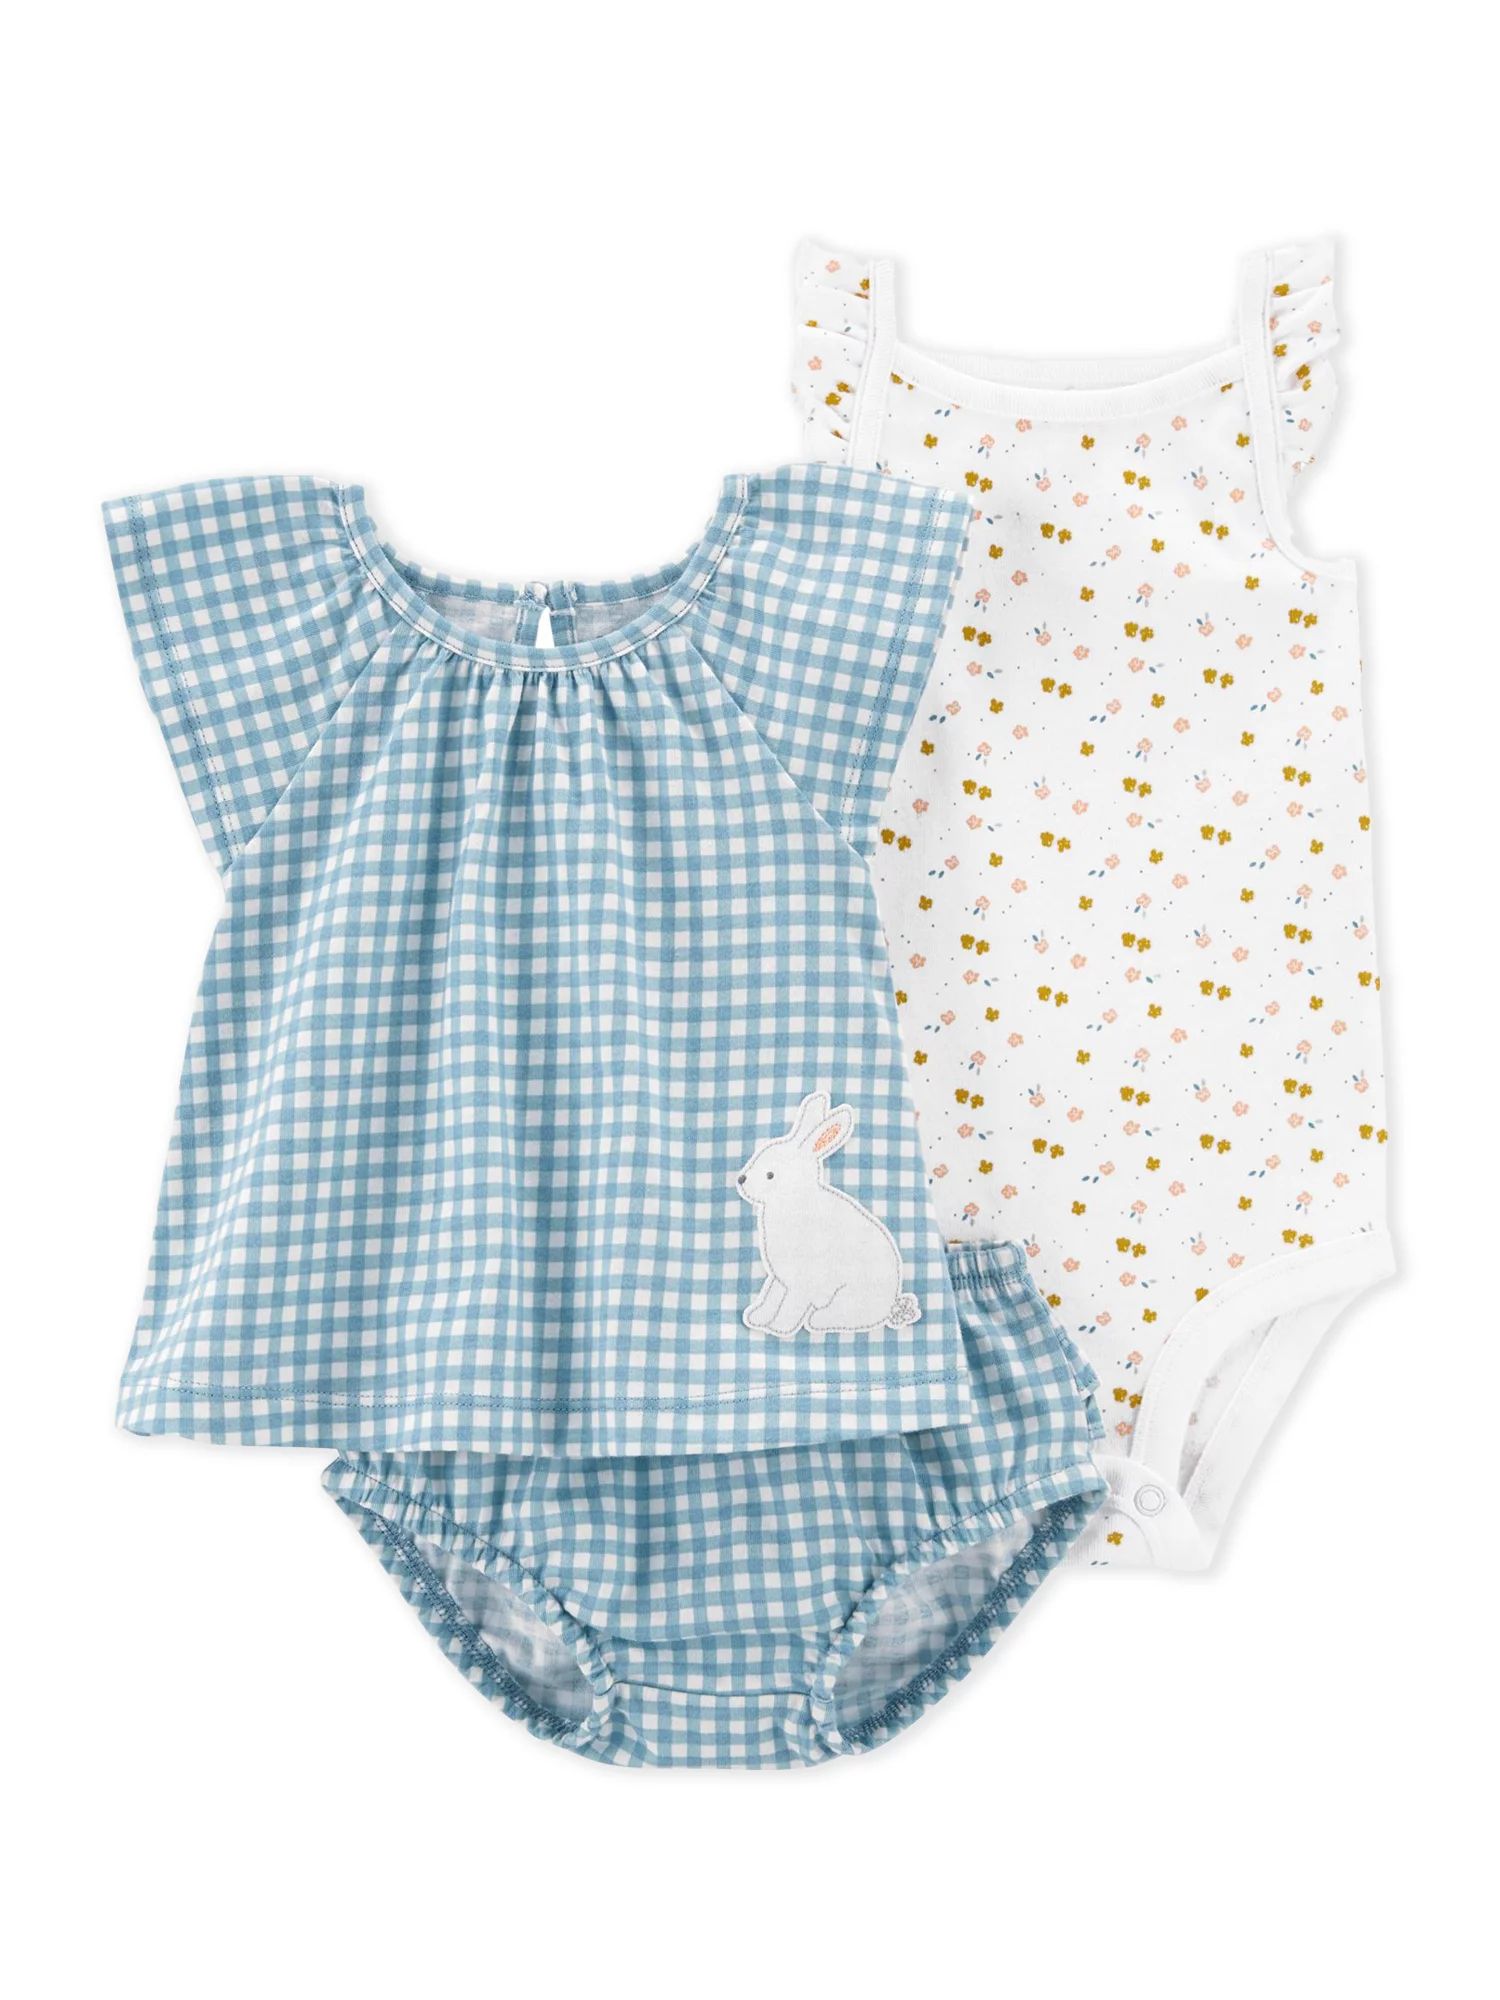 Carter's Child of Mine Baby Girl Easter Outfit Set, 3-Piece, Sizes 0-24M | Walmart (US)